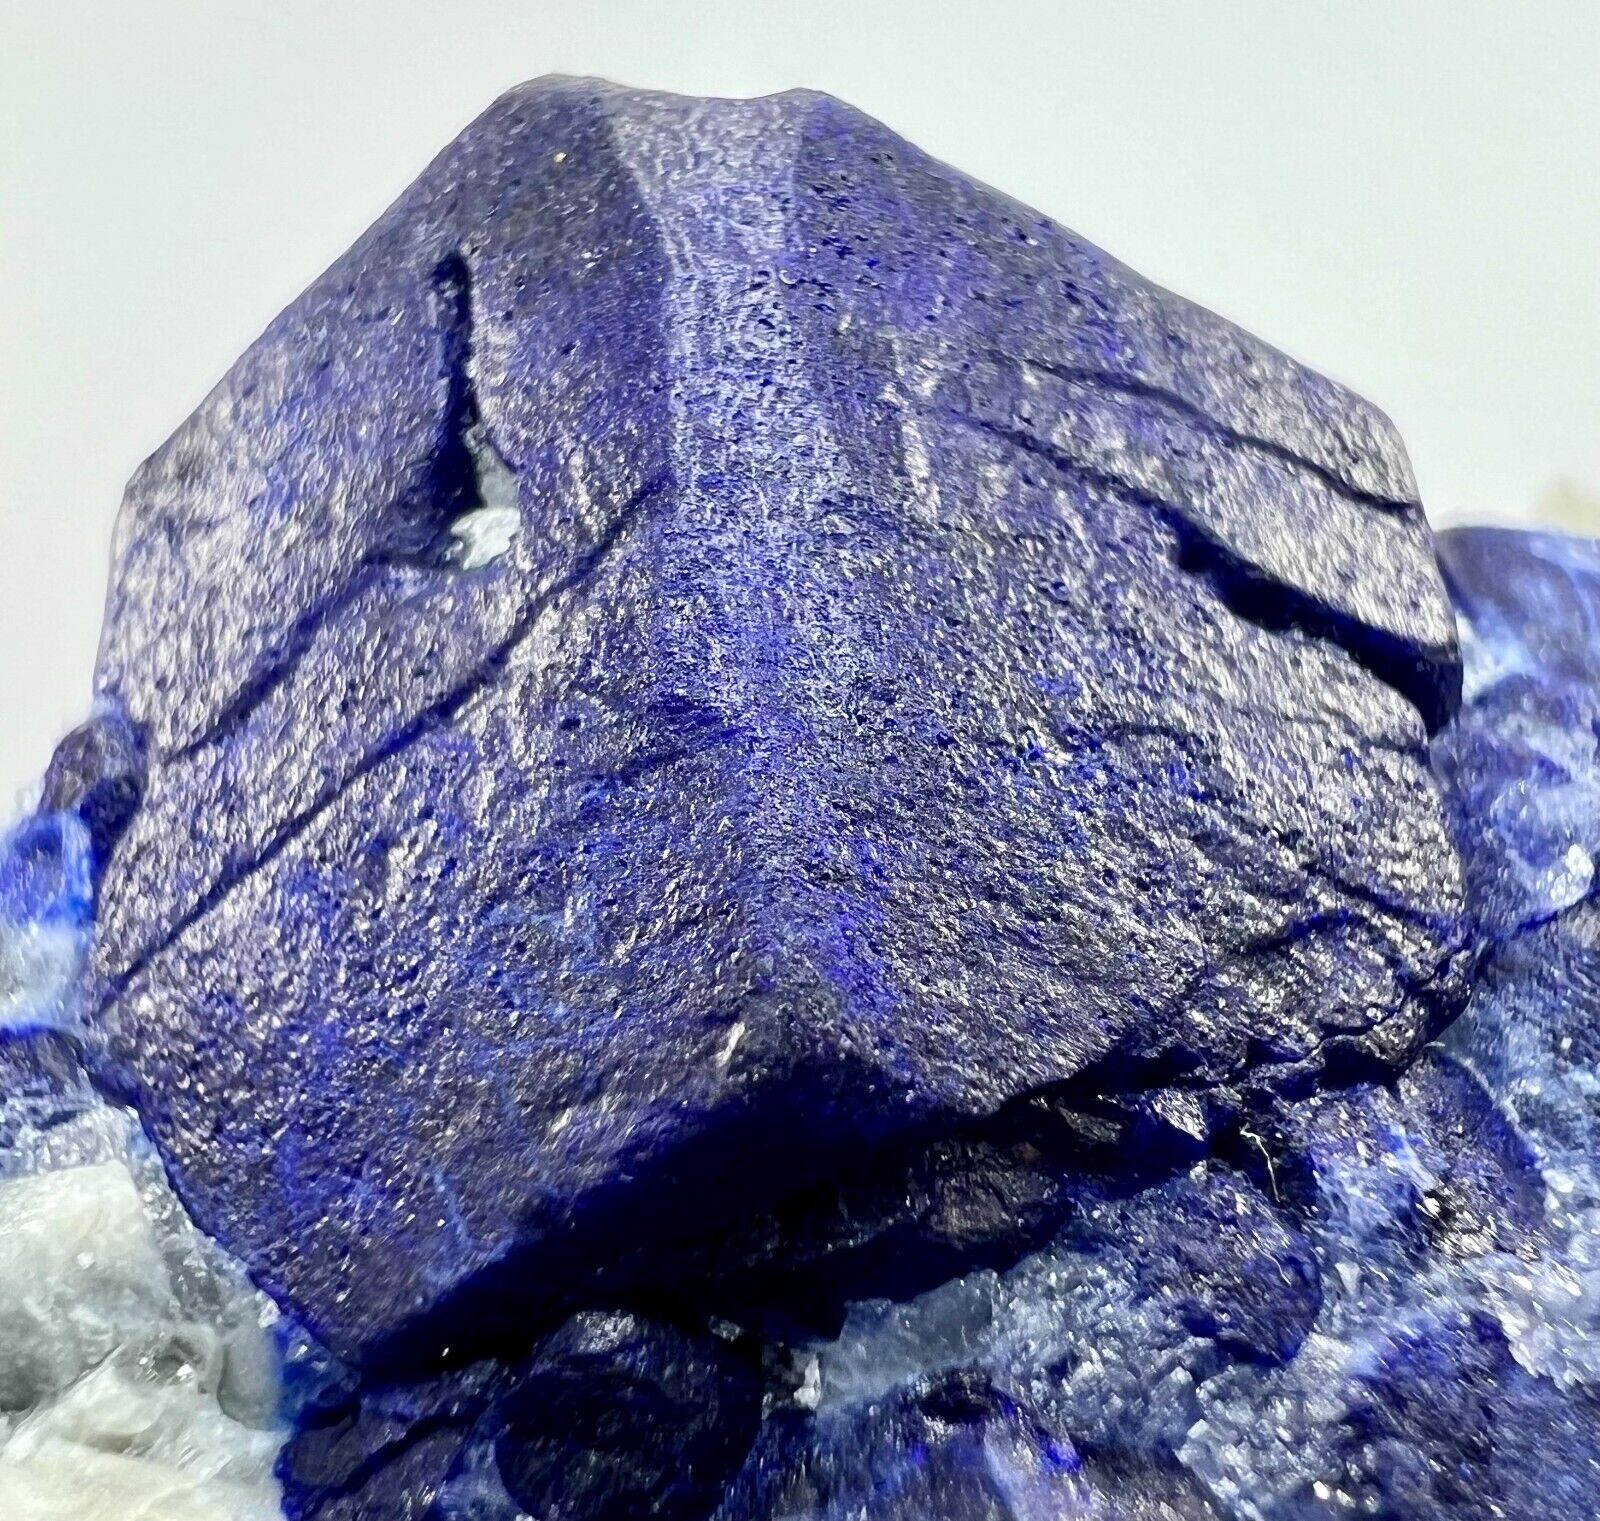 140 GM Full Terminate Lazurite Huge Crystal With Phlogopite On Matrix From @AFG.